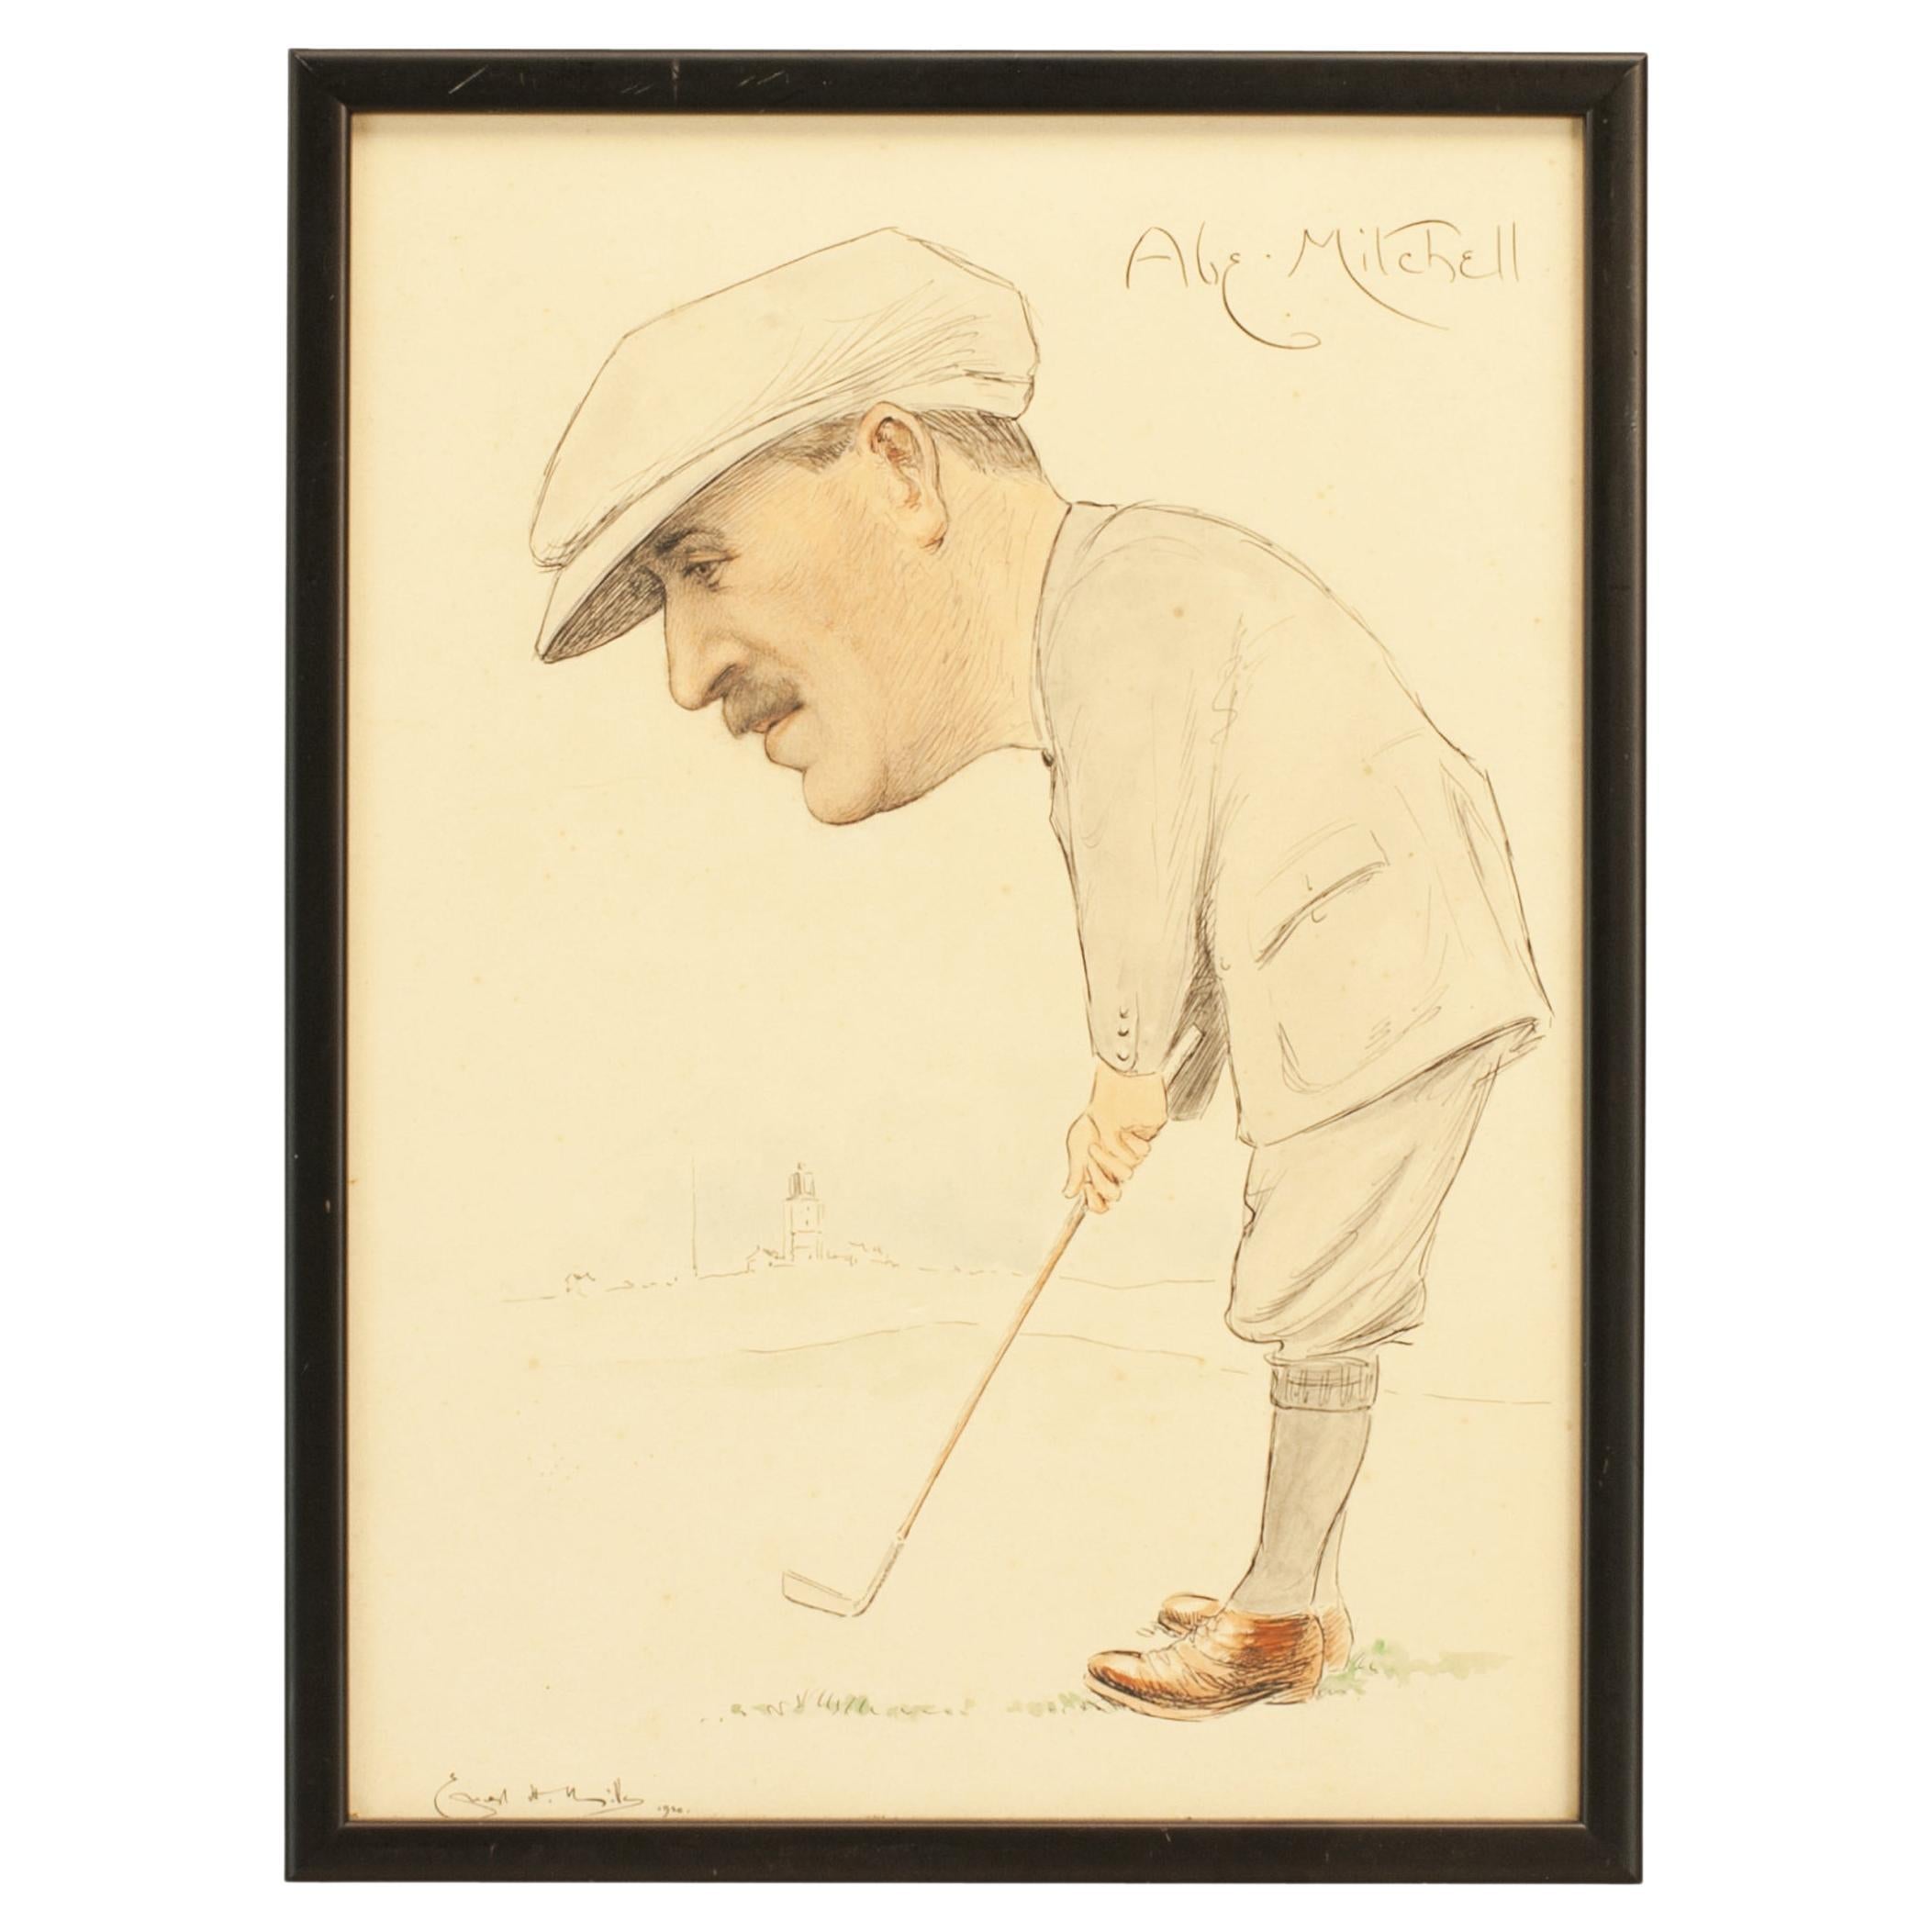 Vintage Golf Picture Of Abe Mitchell, Watercolour Painting.